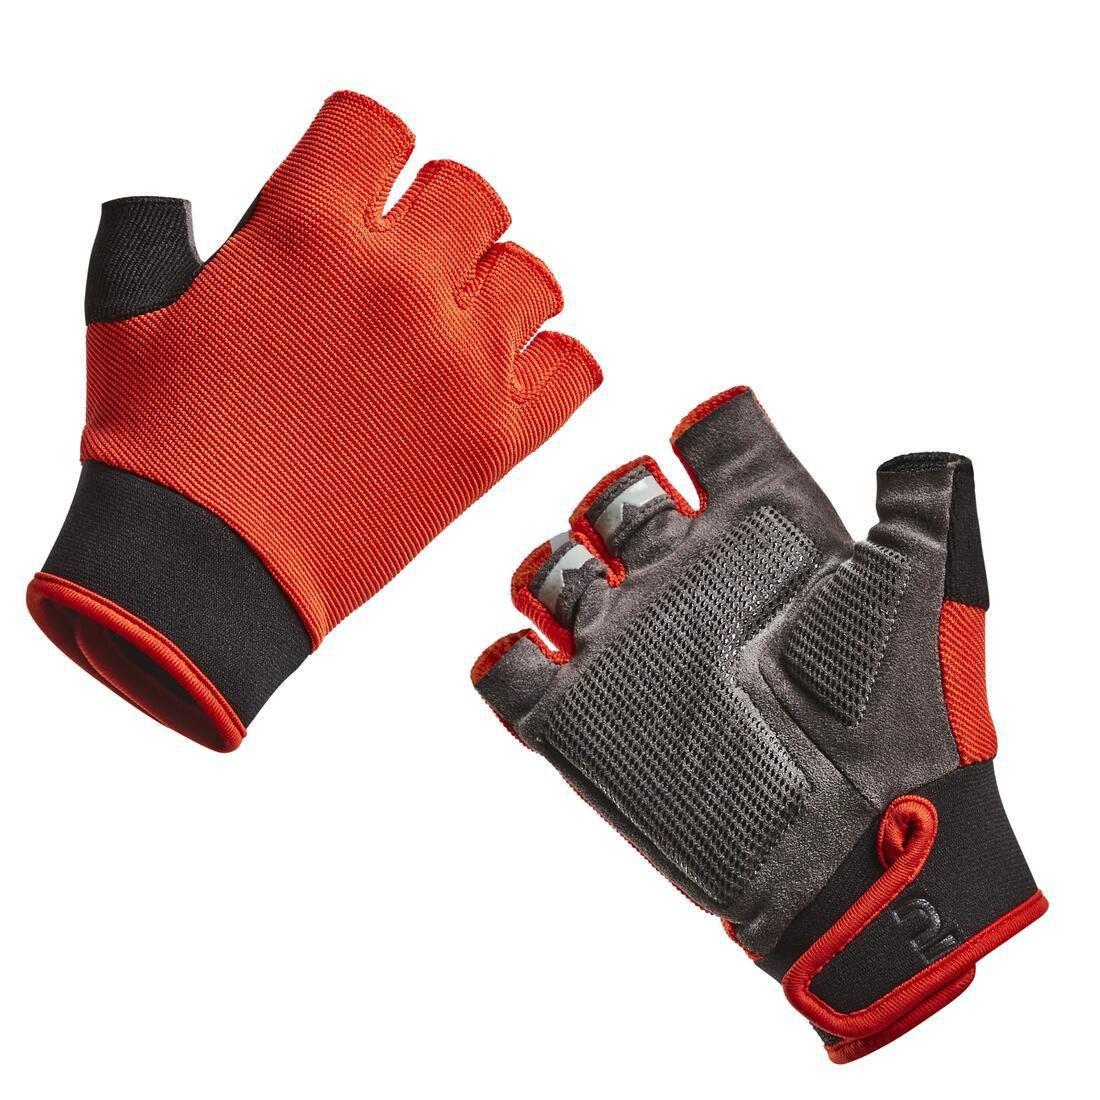 BTWIN - Kids' Cycling Gloves 500, Bright red